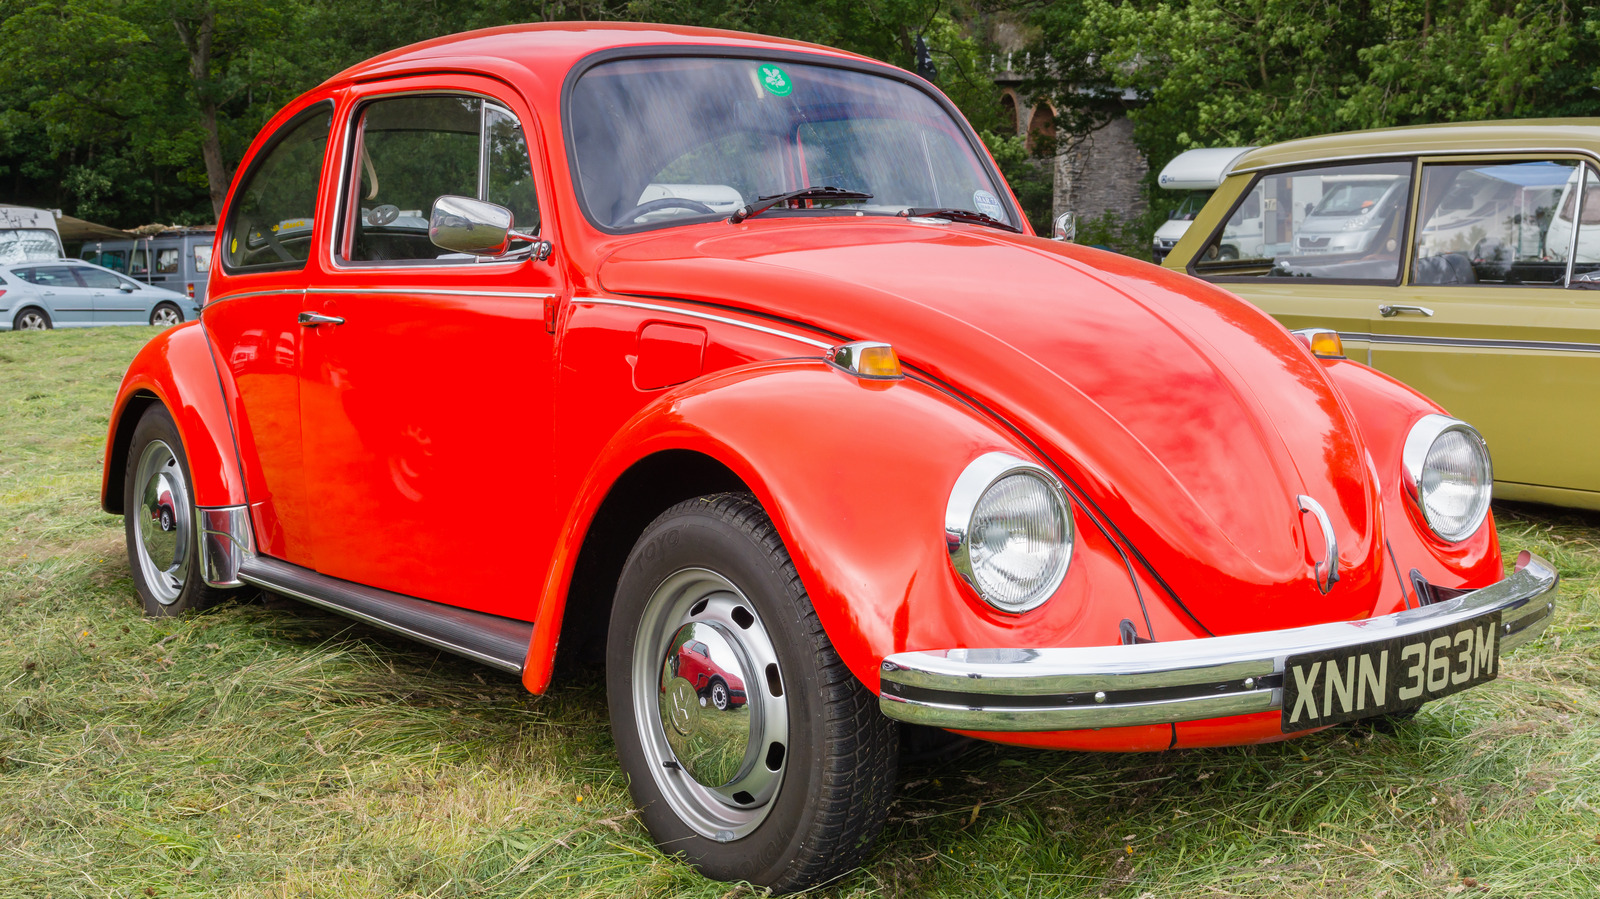 https://www.slashgear.com/img/gallery/8-of-the-coolest-and-most-unique-features-of-the-volkswagen-beetle/l-intro-1688059276.jpg